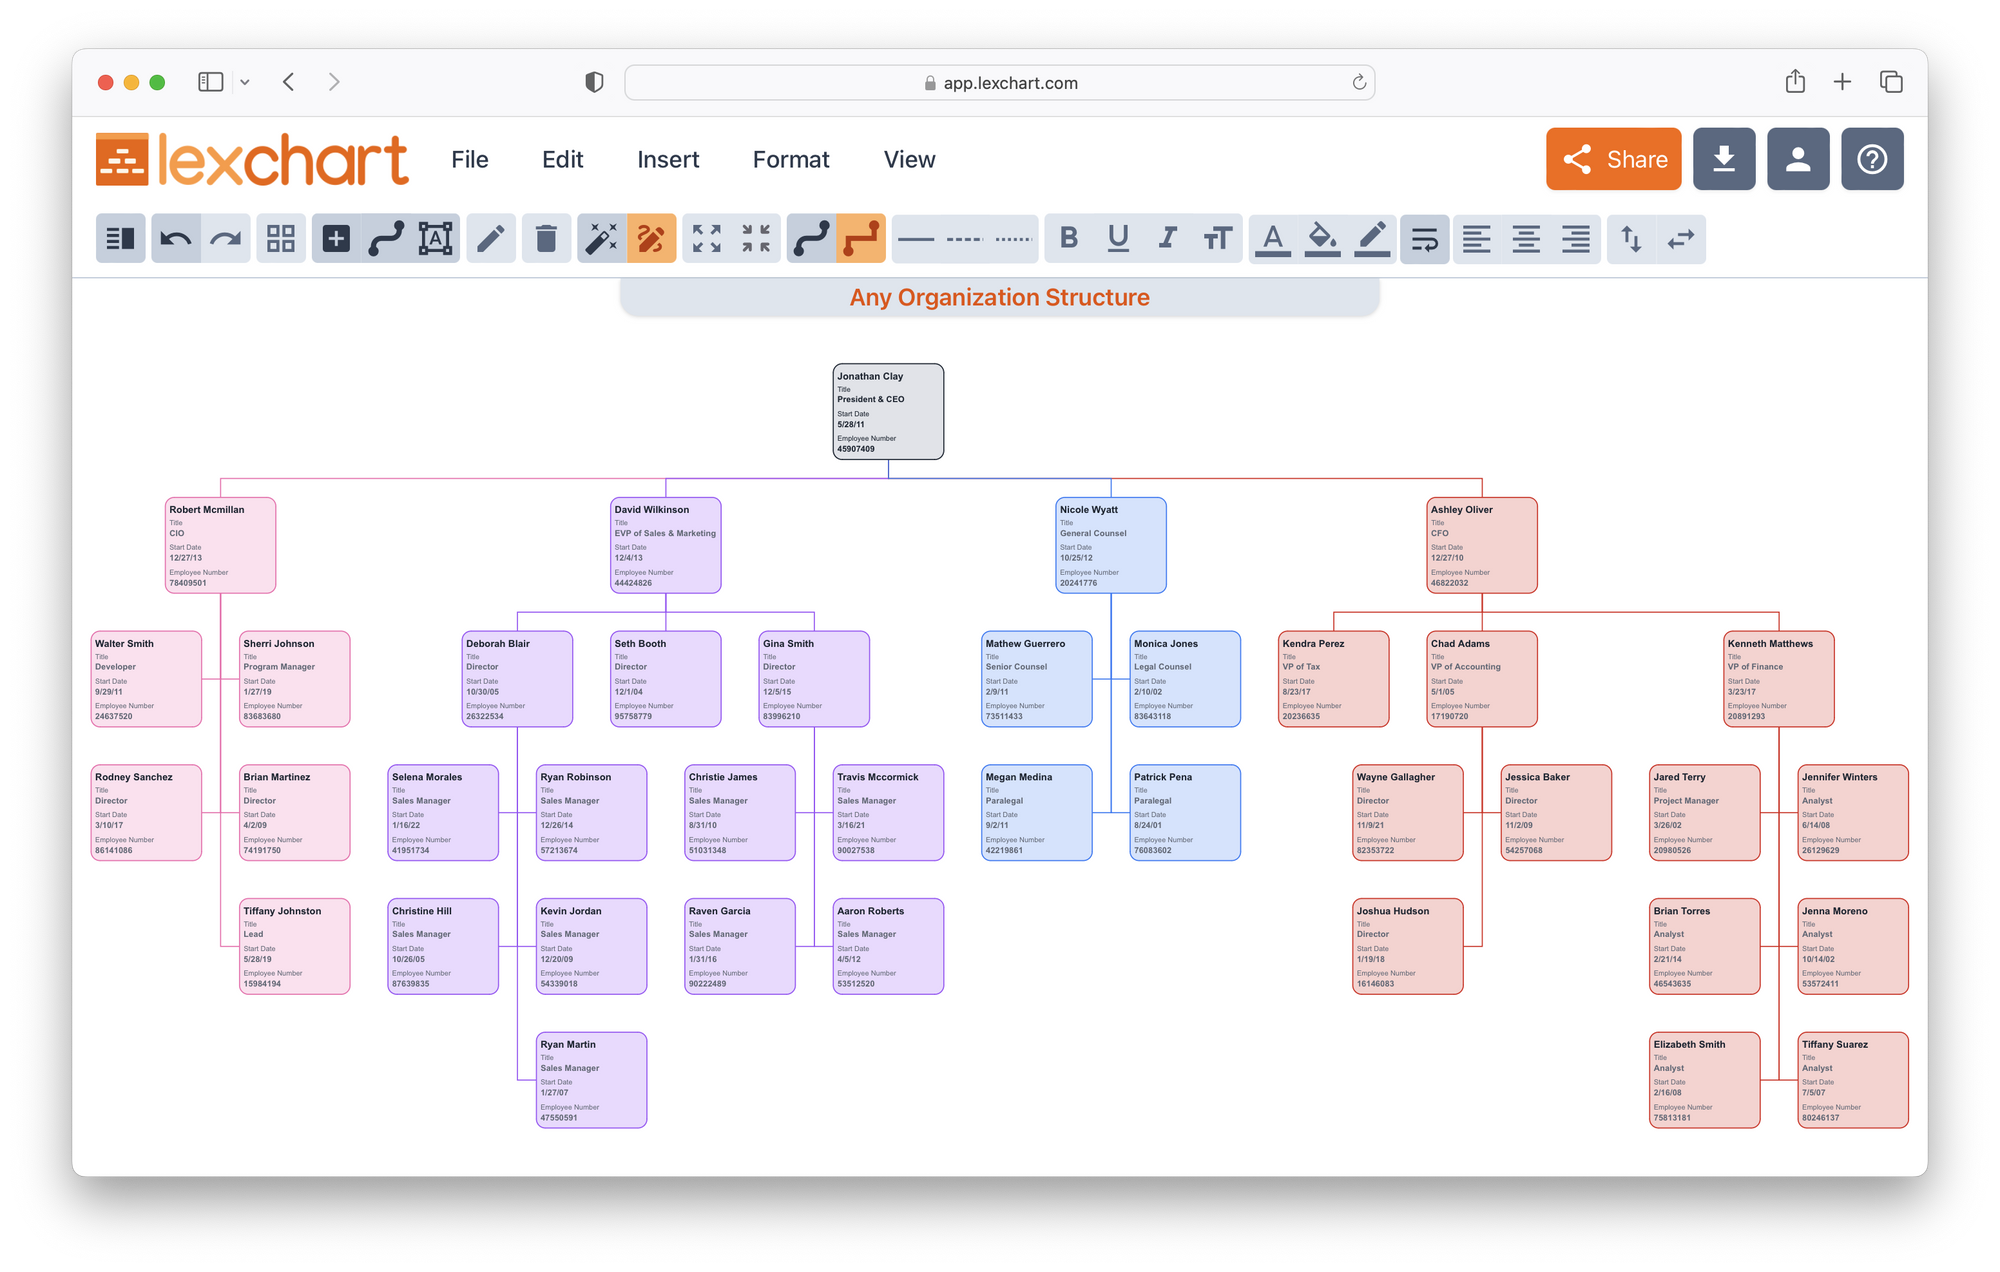 Generate organizational charts for any organization structure with Lexchart